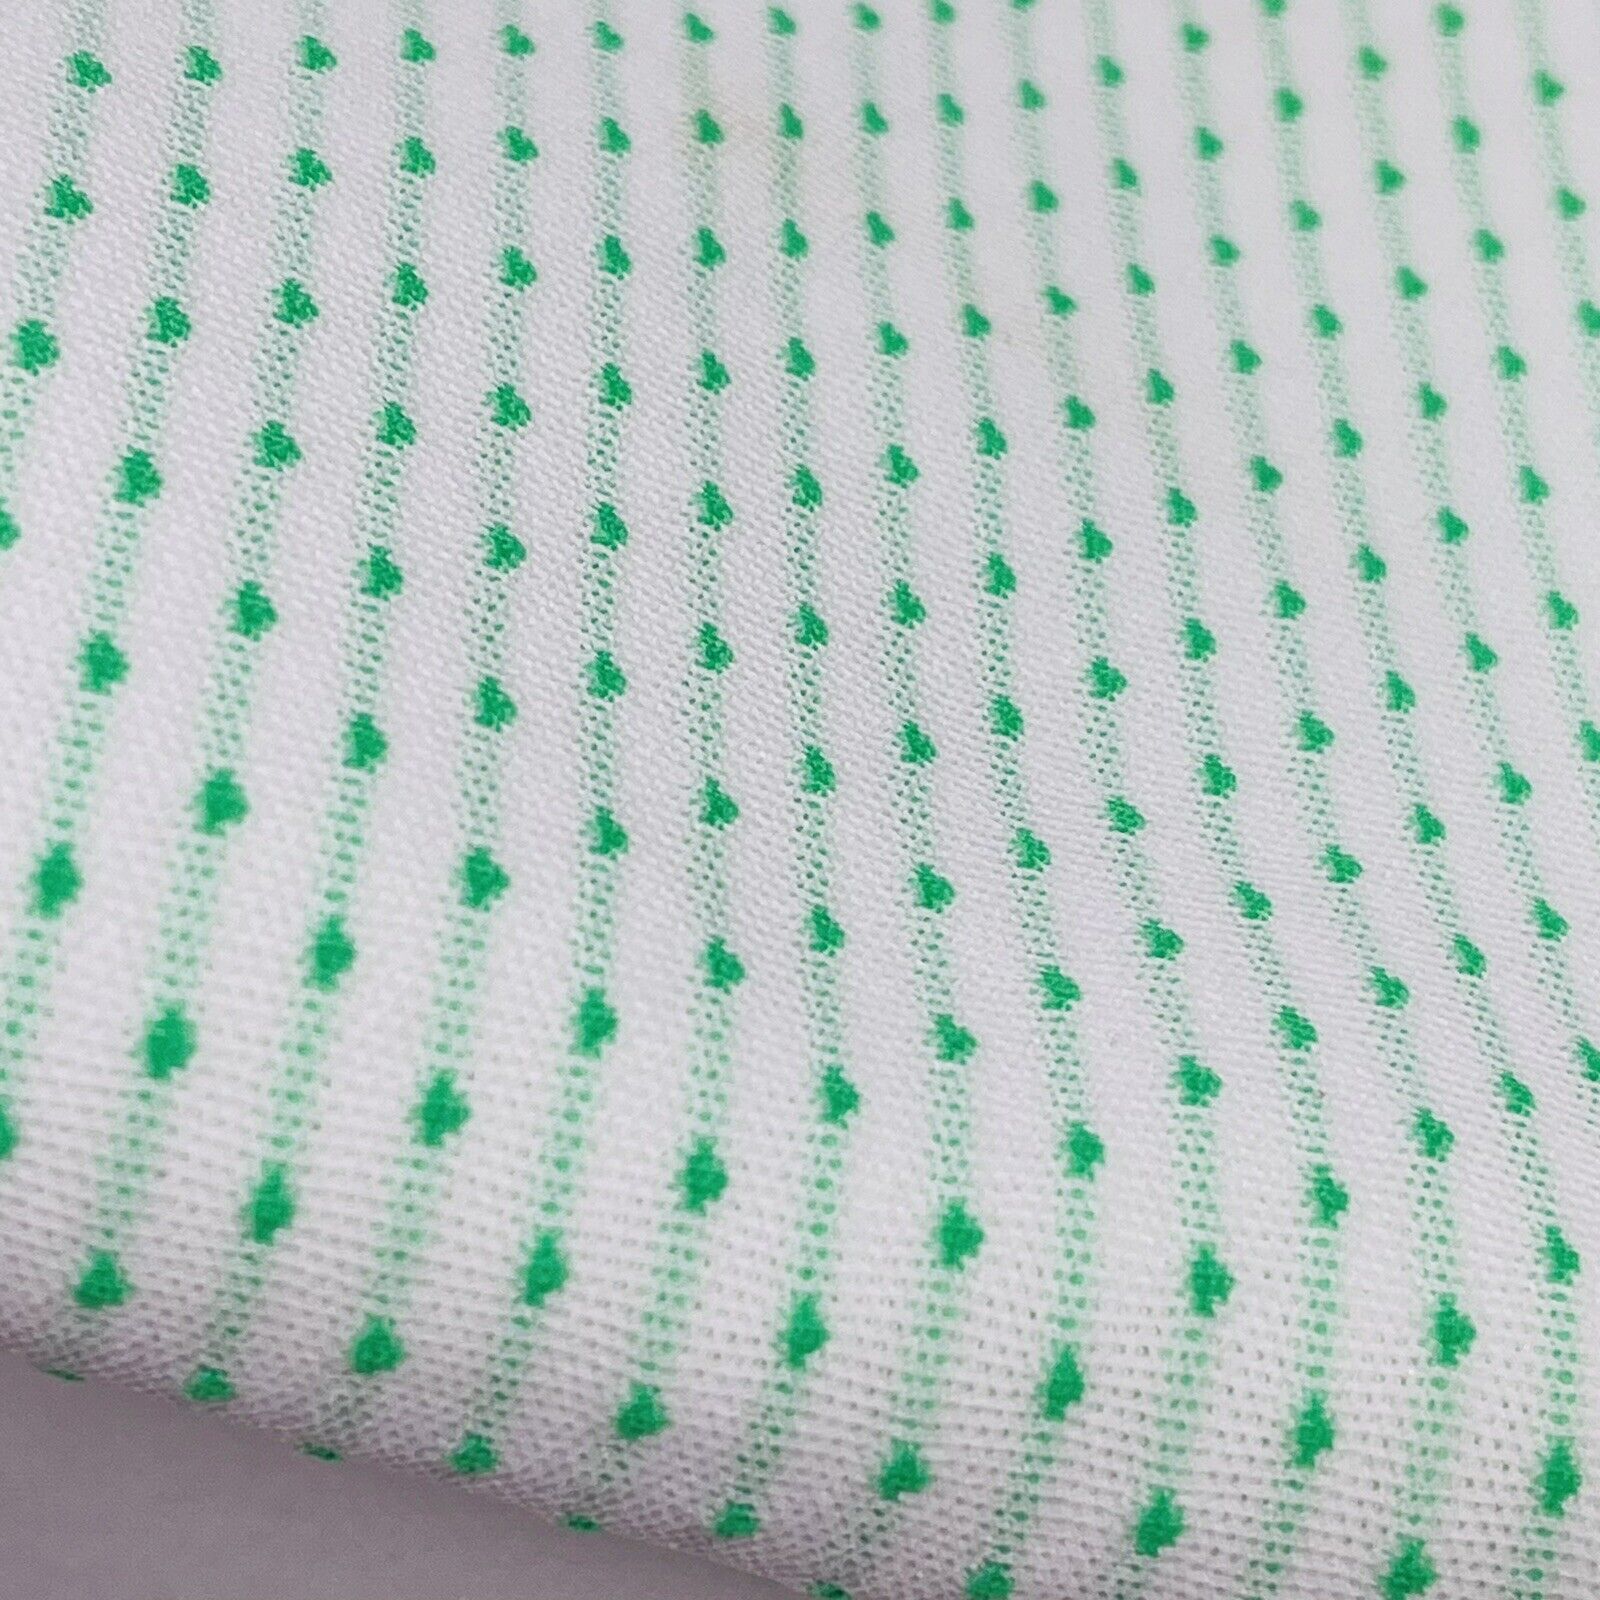 Vintage 1970's Polyester Knit Fabric White Green Swiss Dot 50” x 66” Remnant